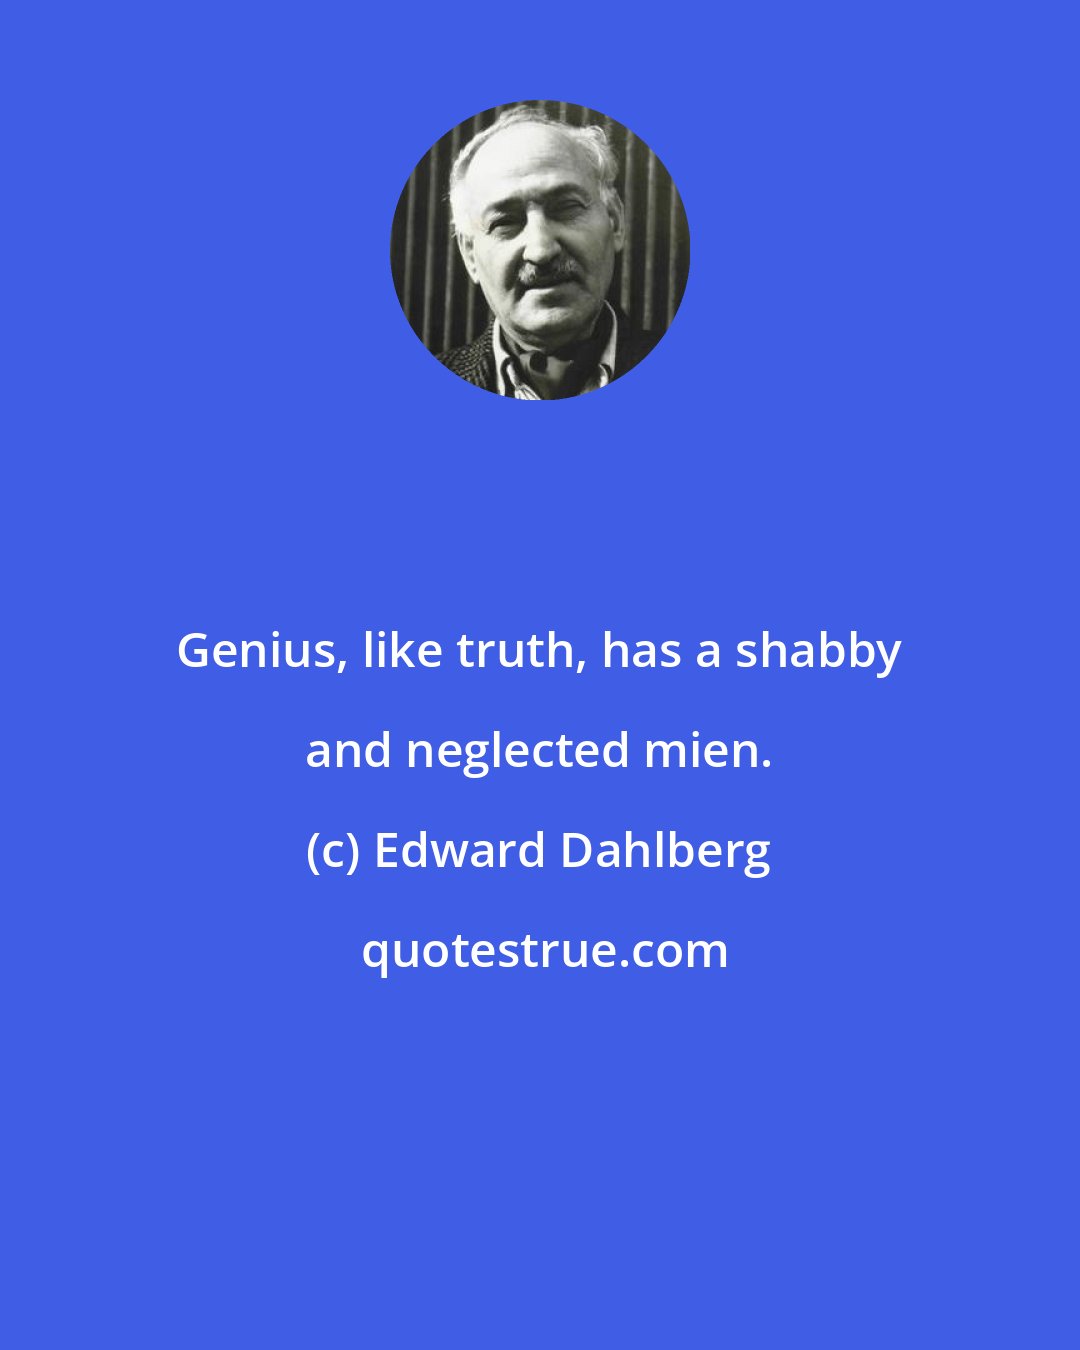 Edward Dahlberg: Genius, like truth, has a shabby and neglected mien.